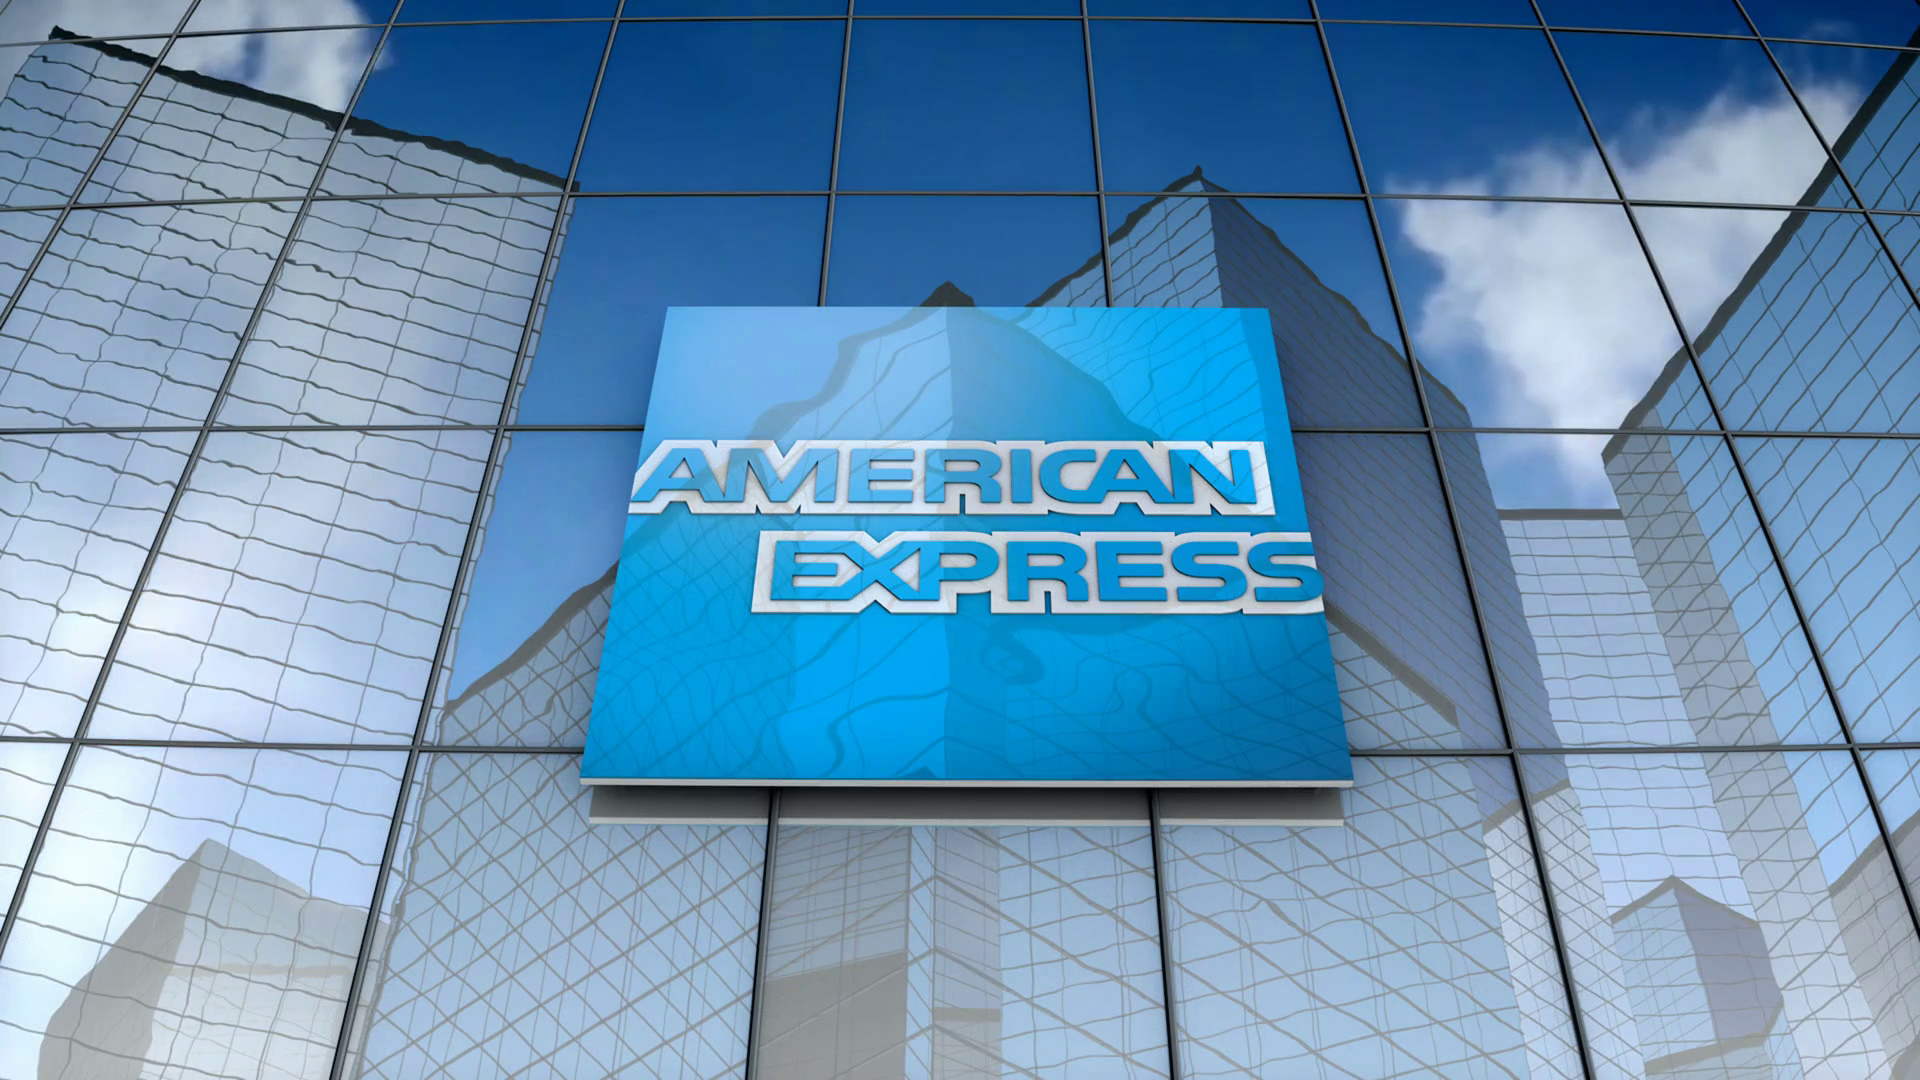 American Express: American financial corporation that primarily issues credit cards, processes payments, and provides travel-related services worldwide. 1920x1080 Full HD Background.